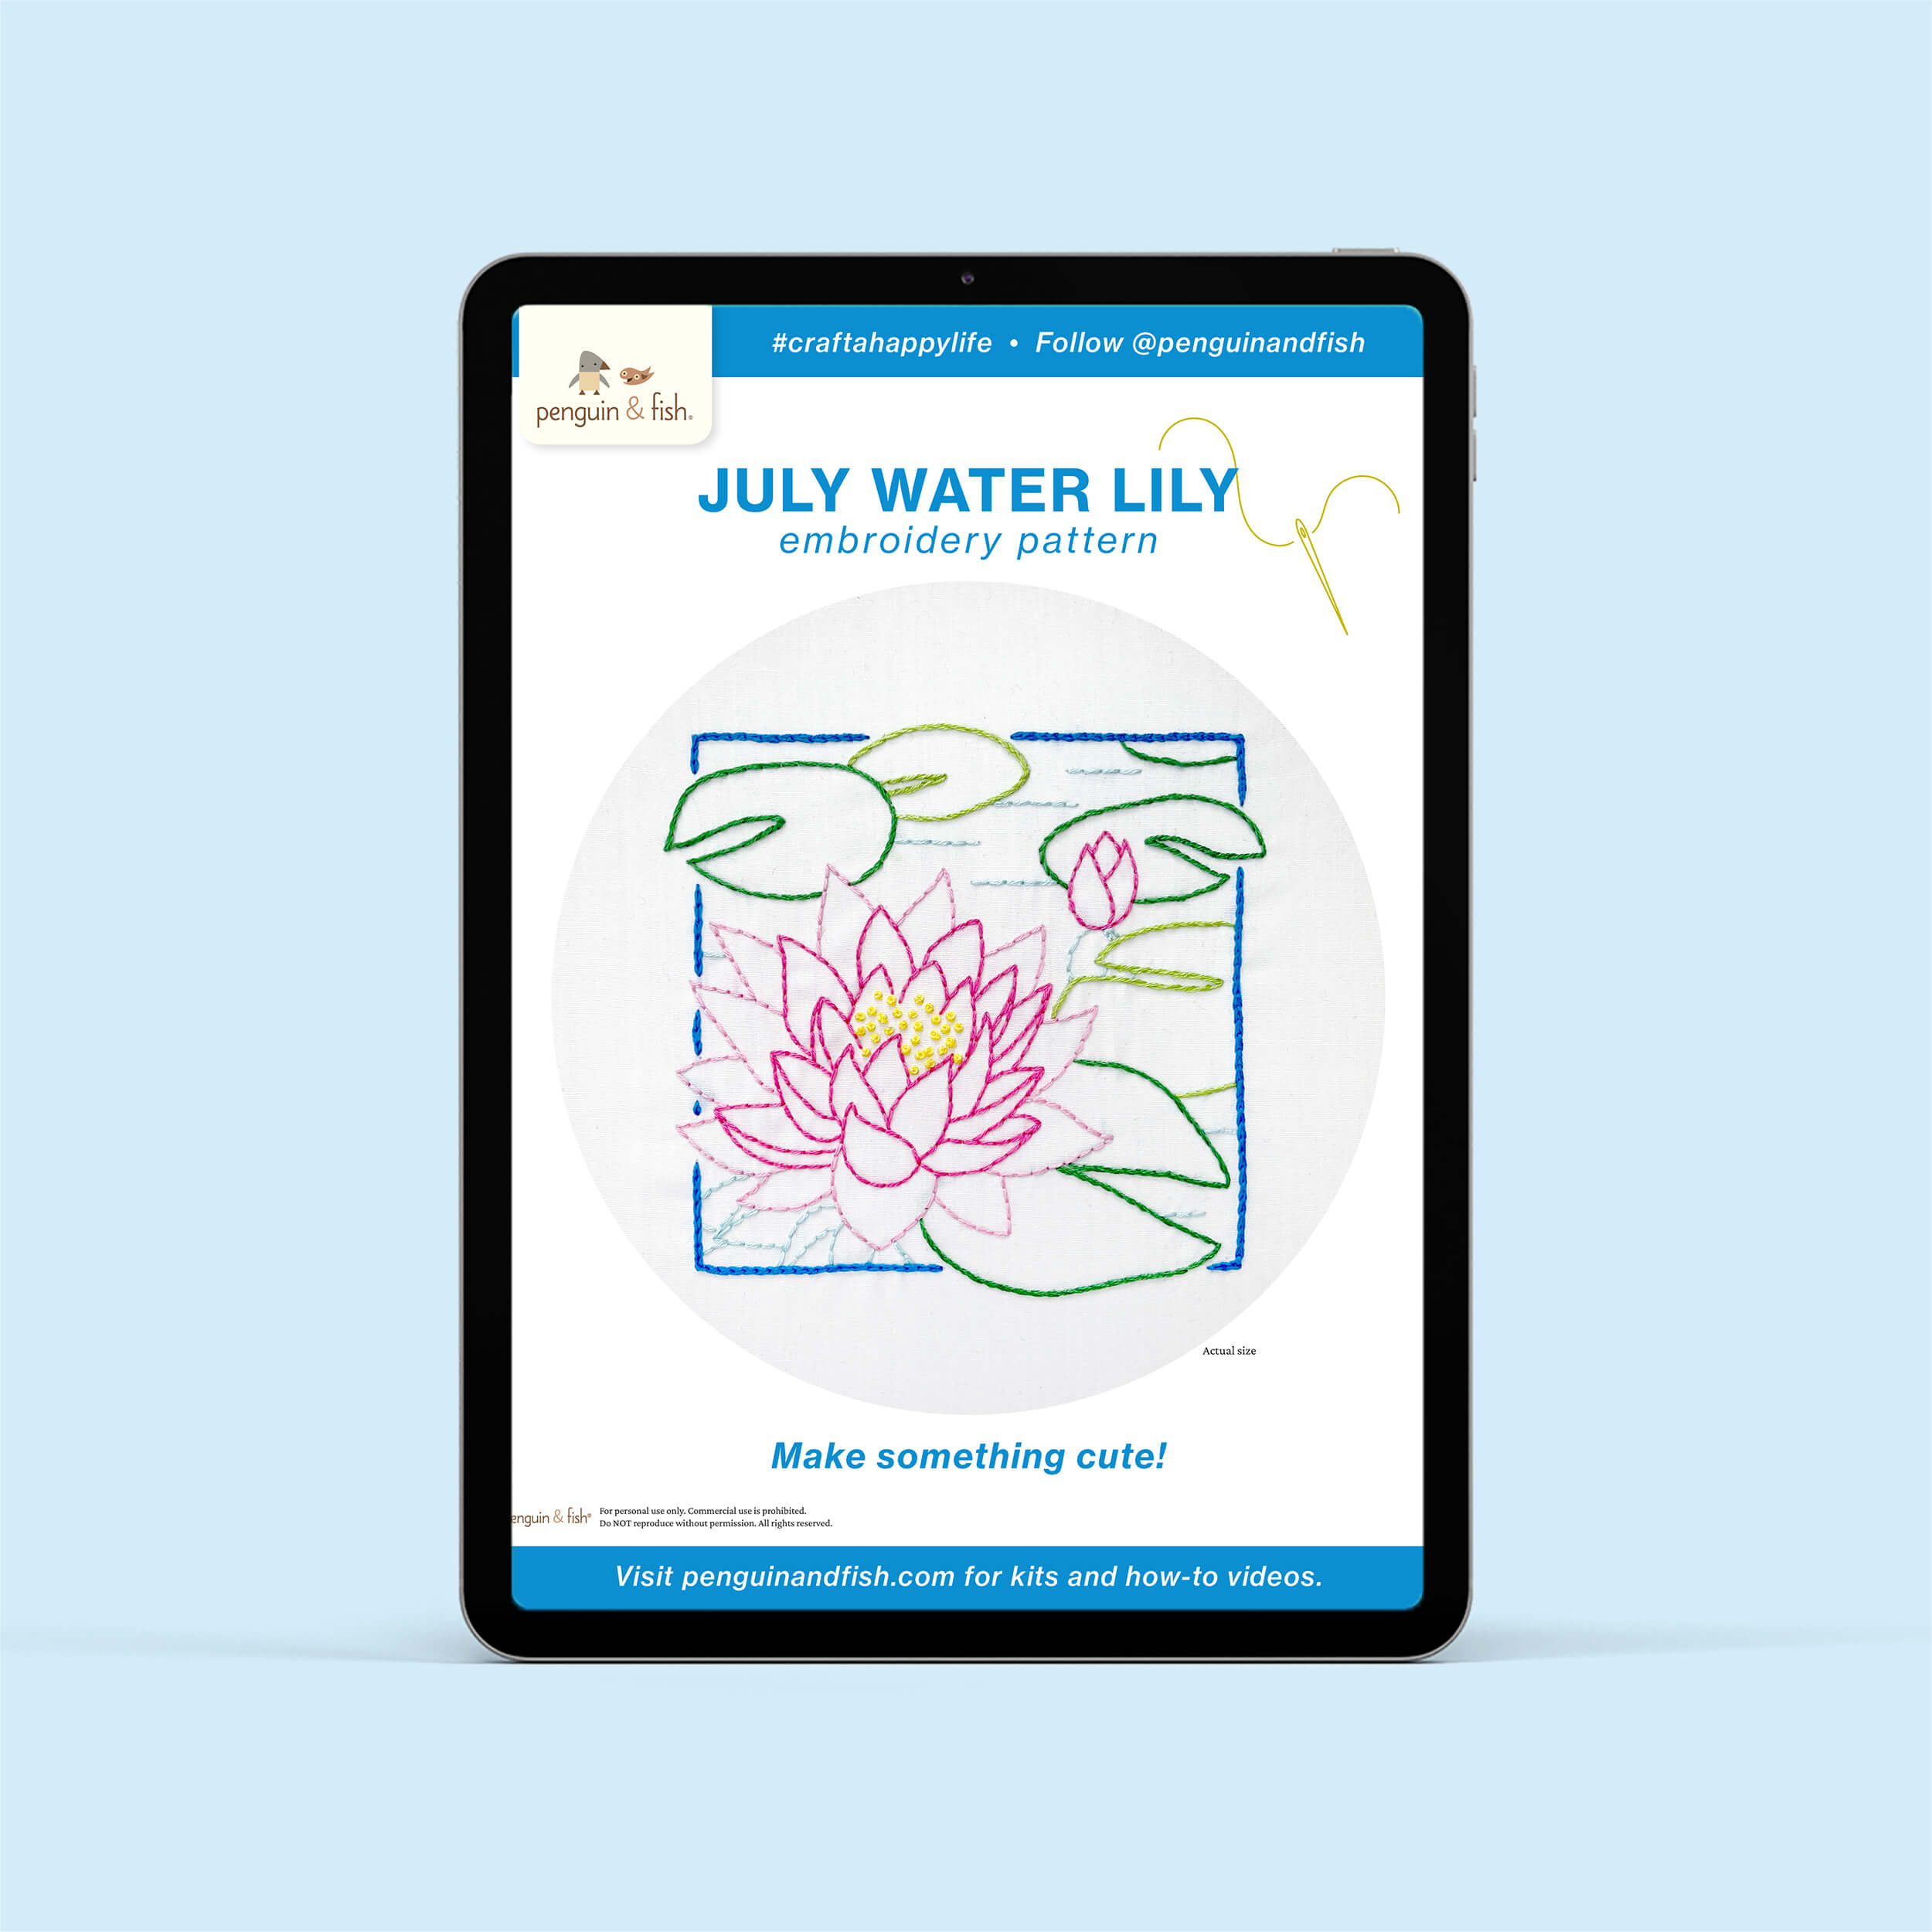 July Water Lily PDF embroidery pattern shown on a tablet